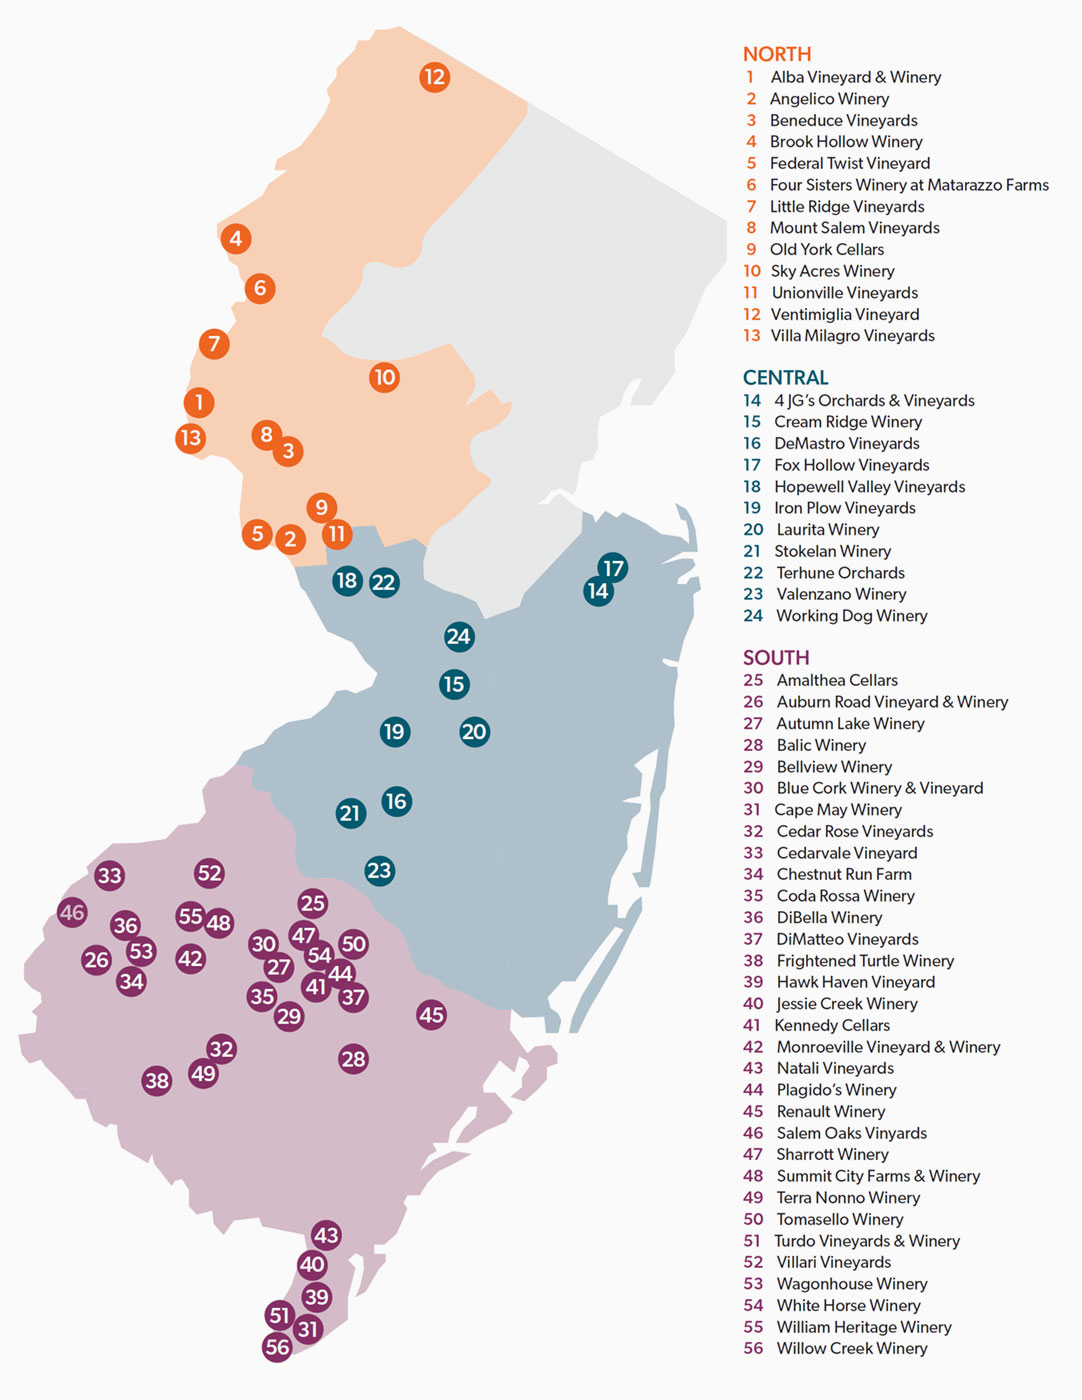 2022 Edible Jersey Winery Guide map